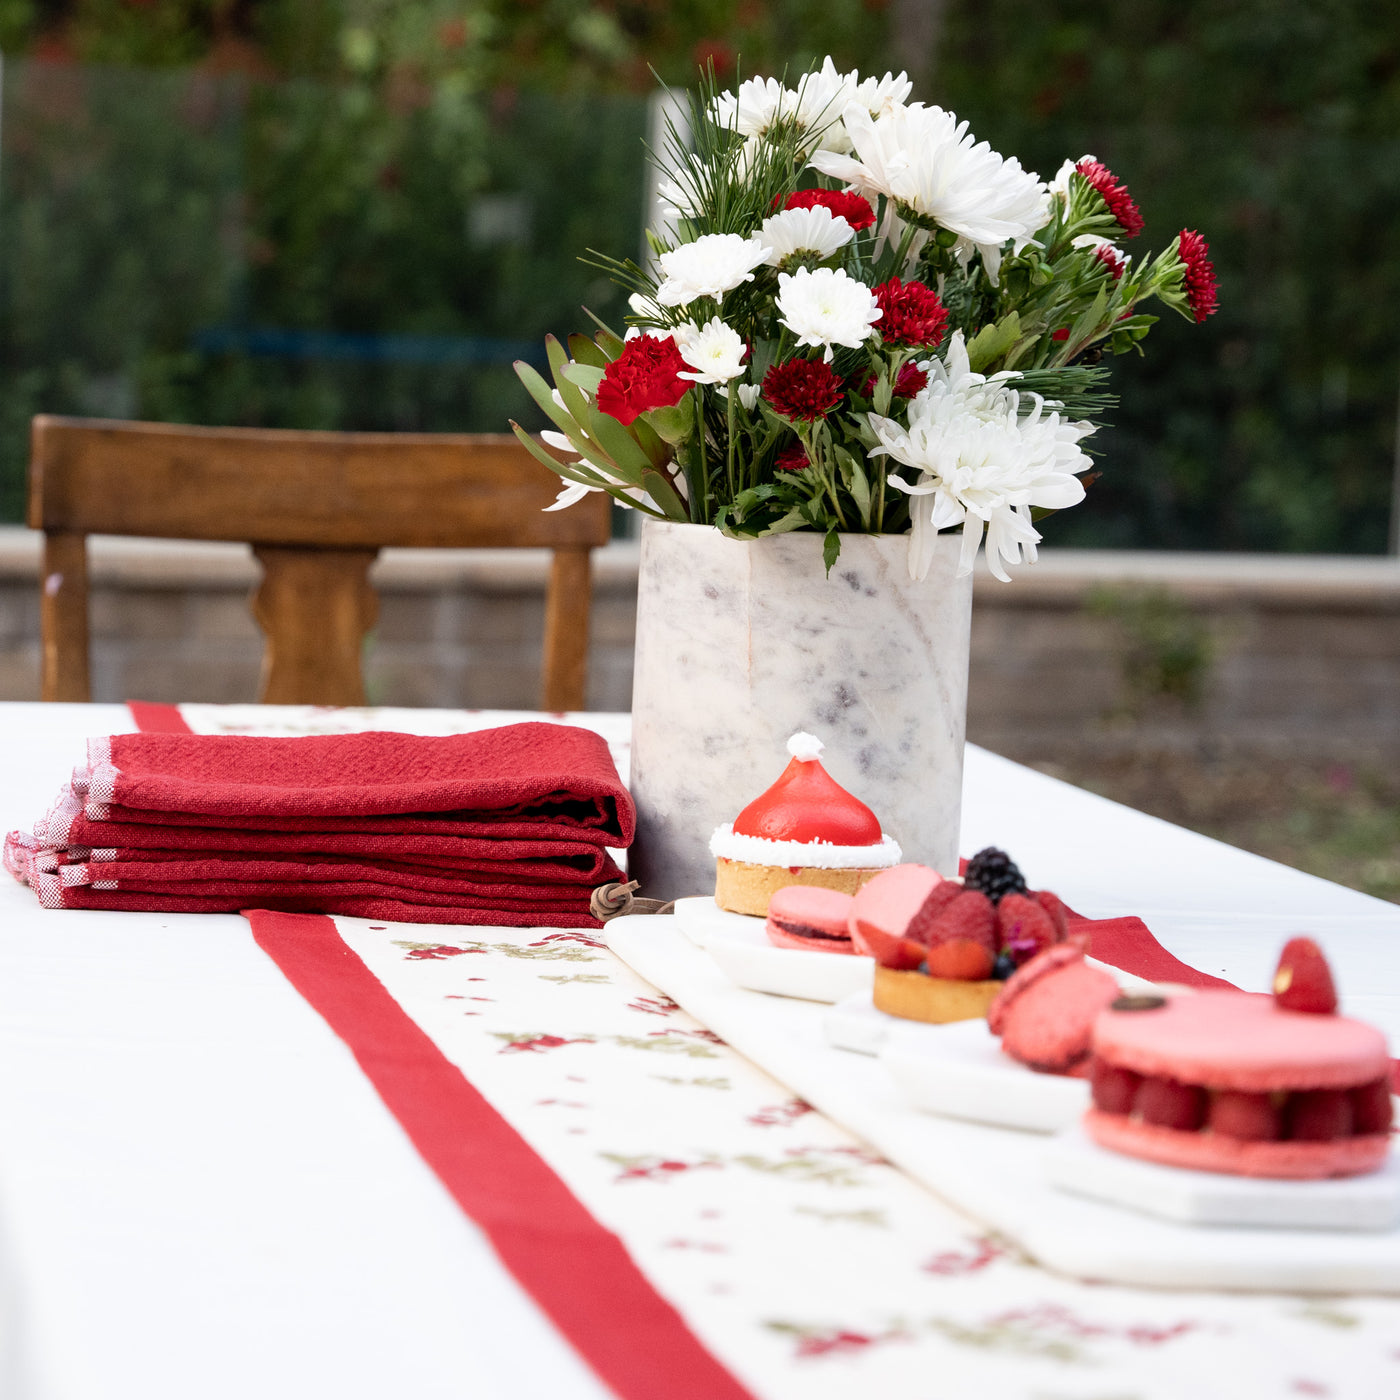 Chunky Linen Red Napkins, Set of 4